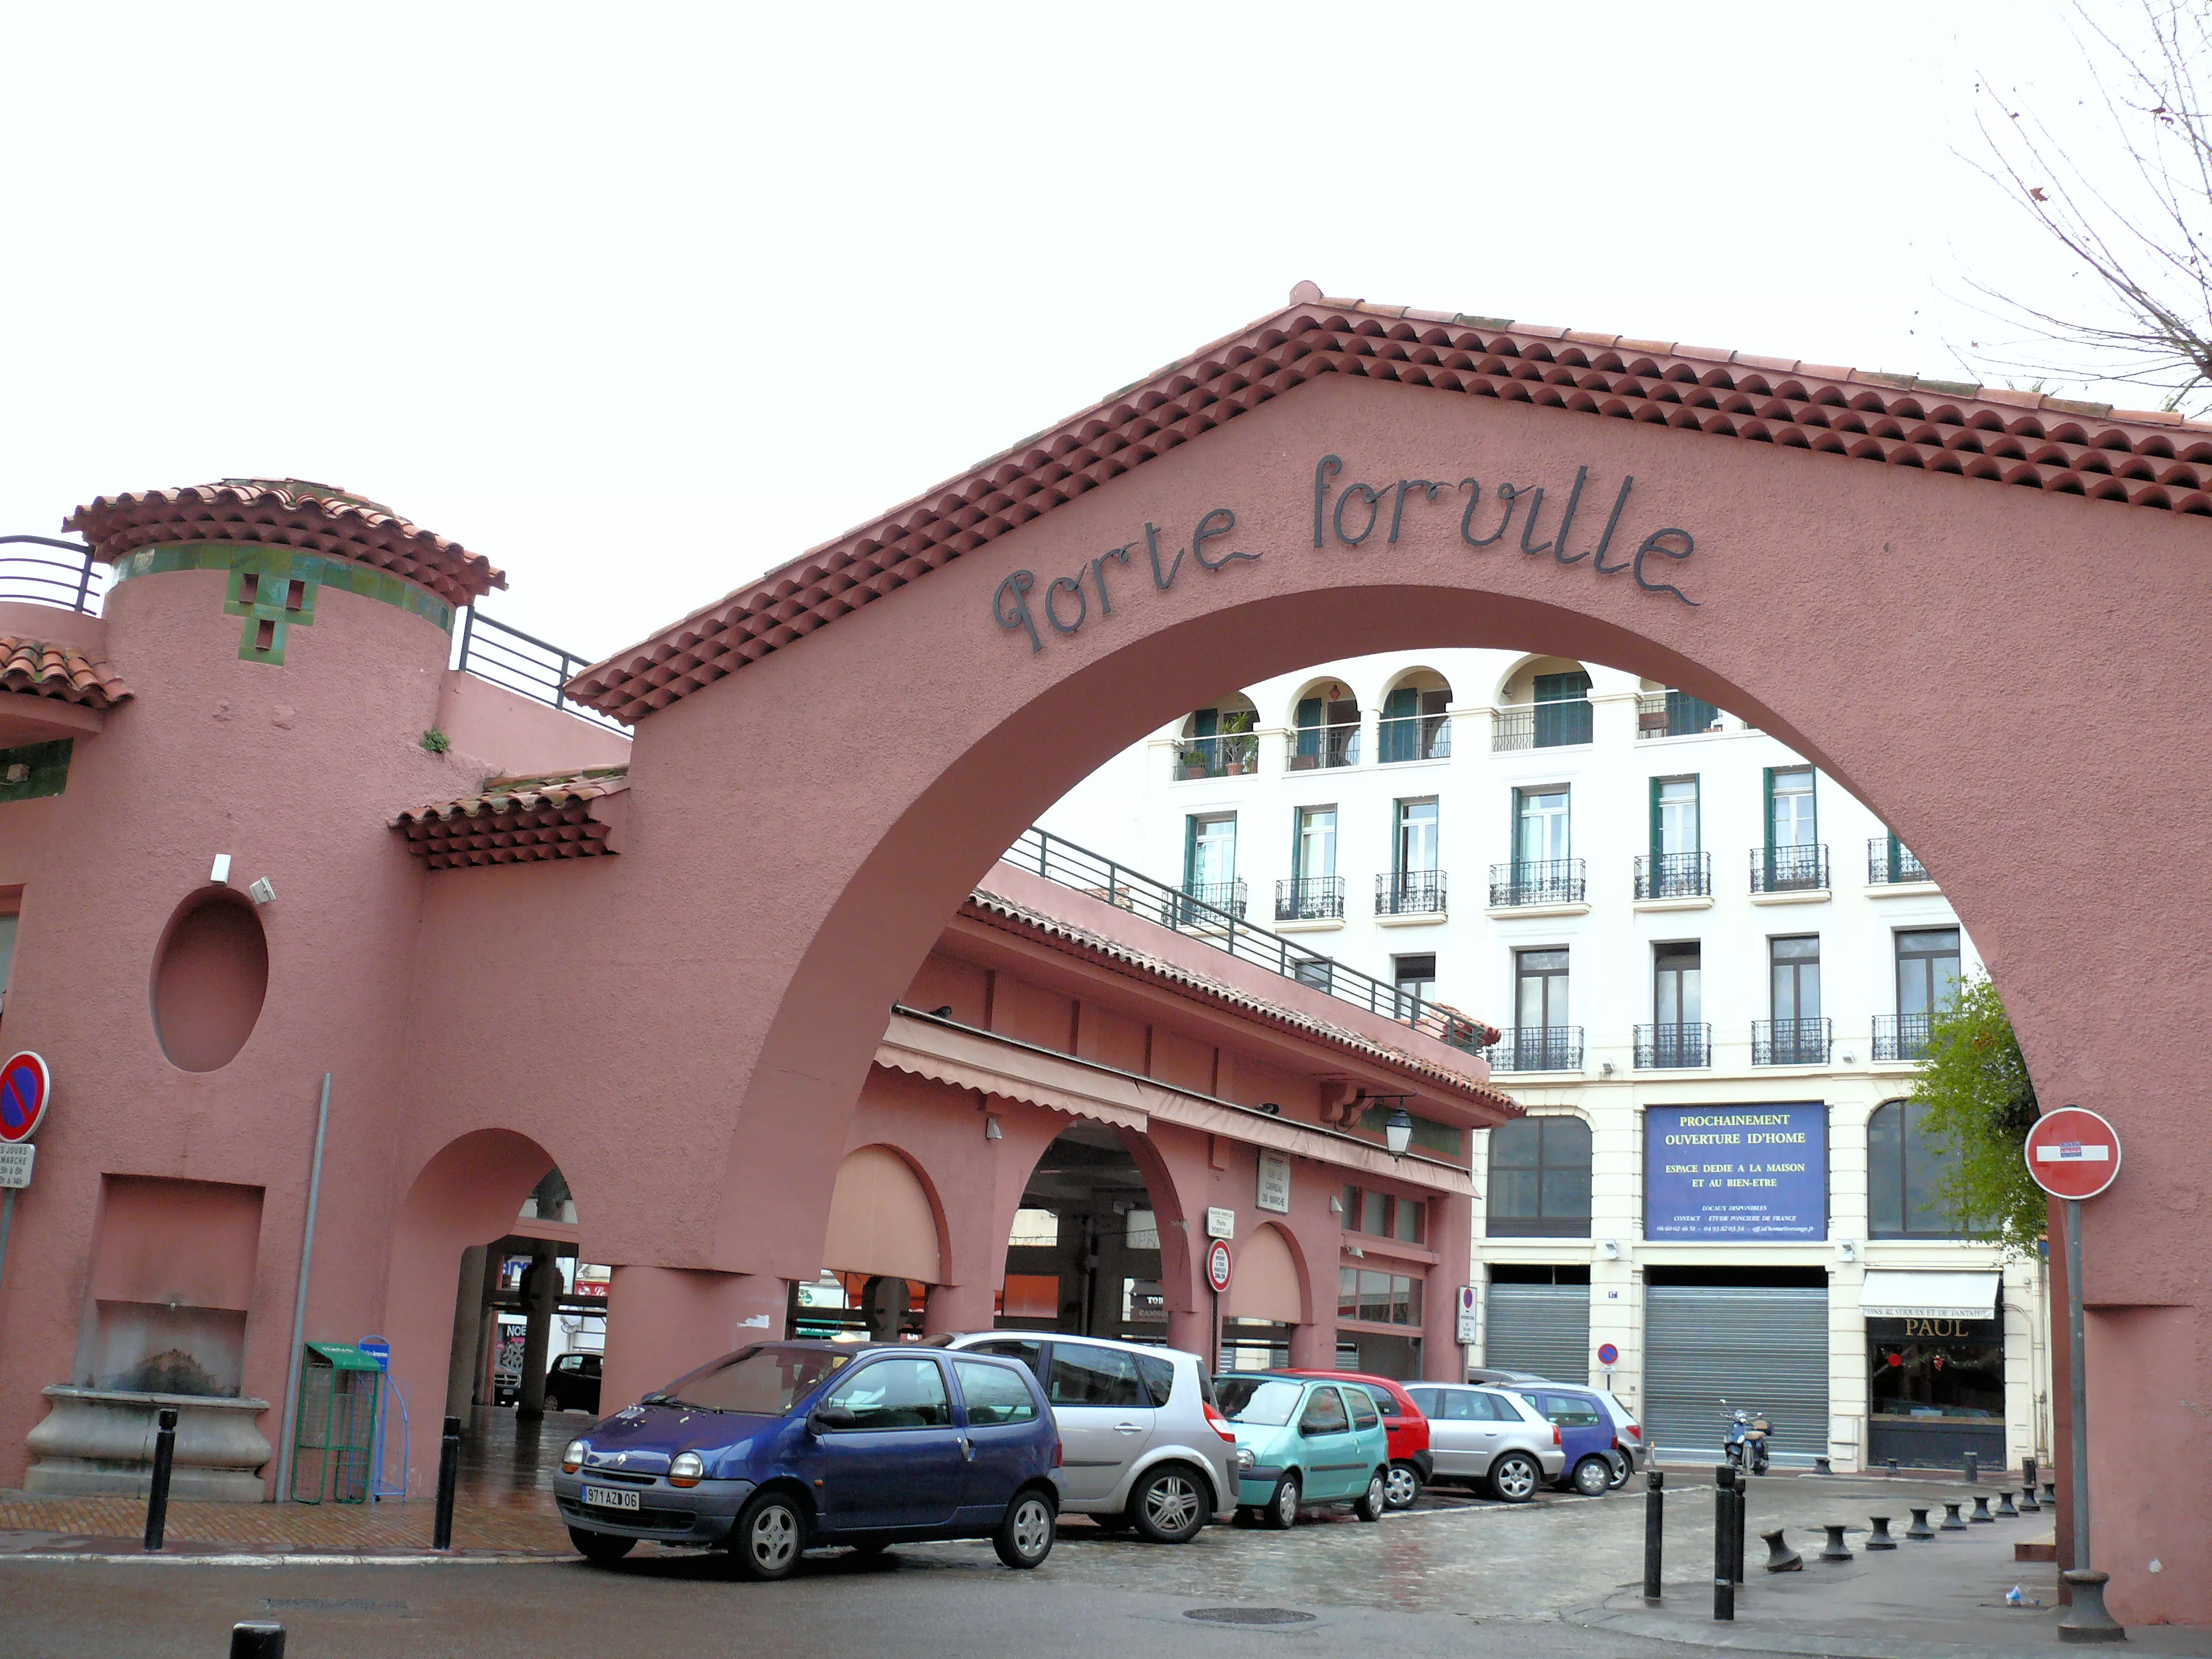 Marche Forville in France, Europe | Architecture - Rated 3.6